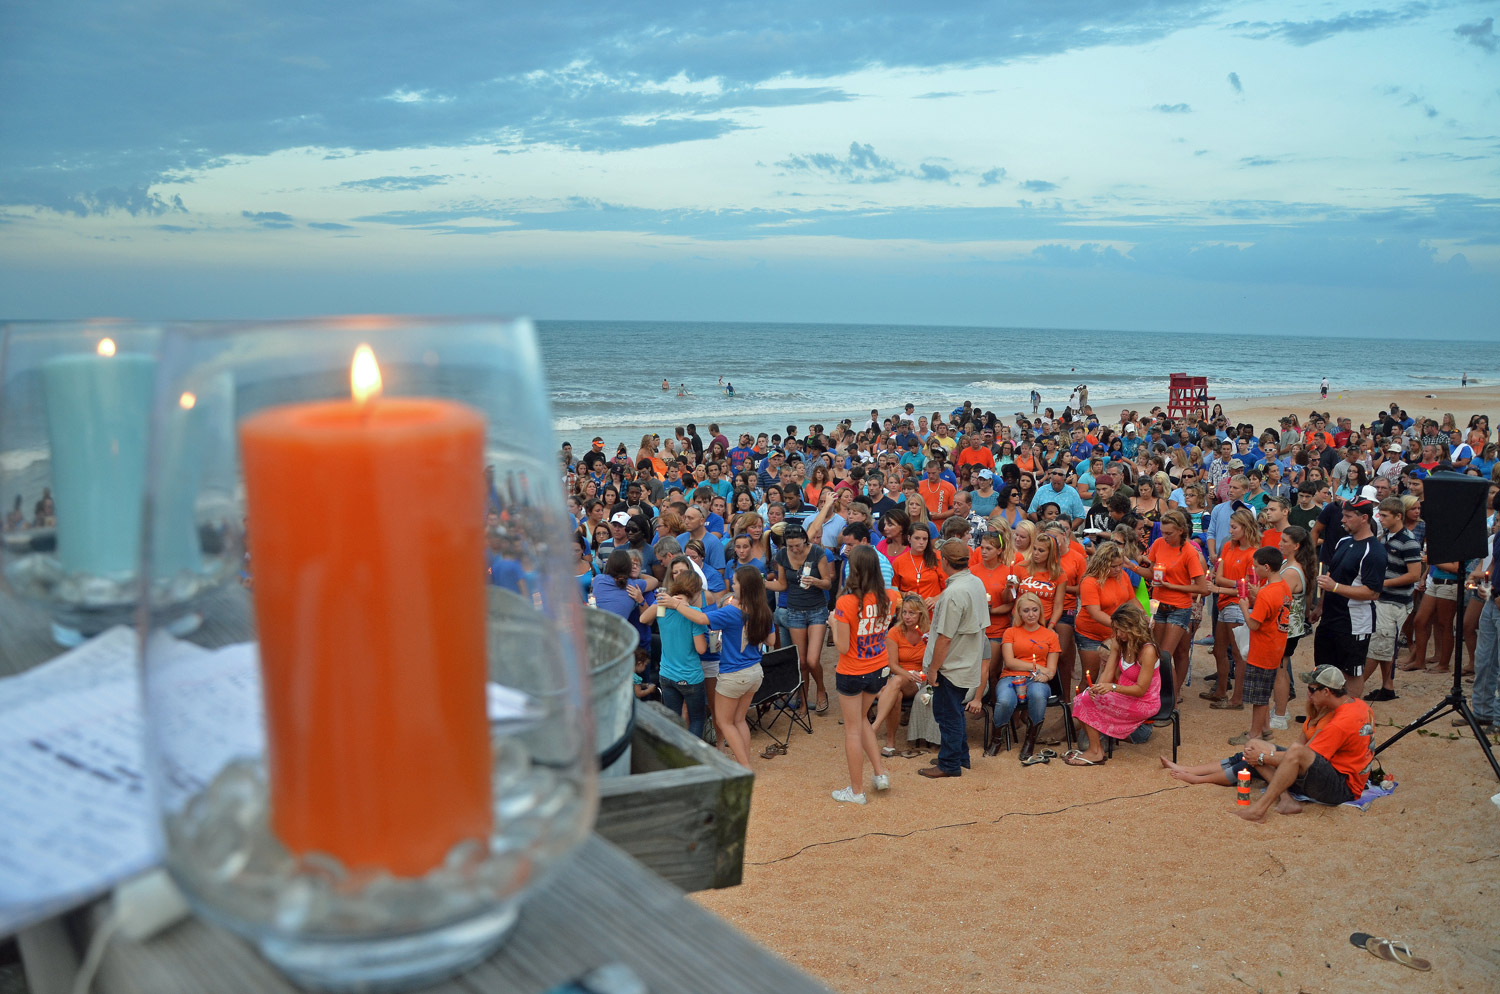 The orange candle was for Lane, the blue for Meredith: favorite colors of two teens remembered in a vigil in Flagler Beach this evening. Click on the image for larger view. (© FlaglerLive)